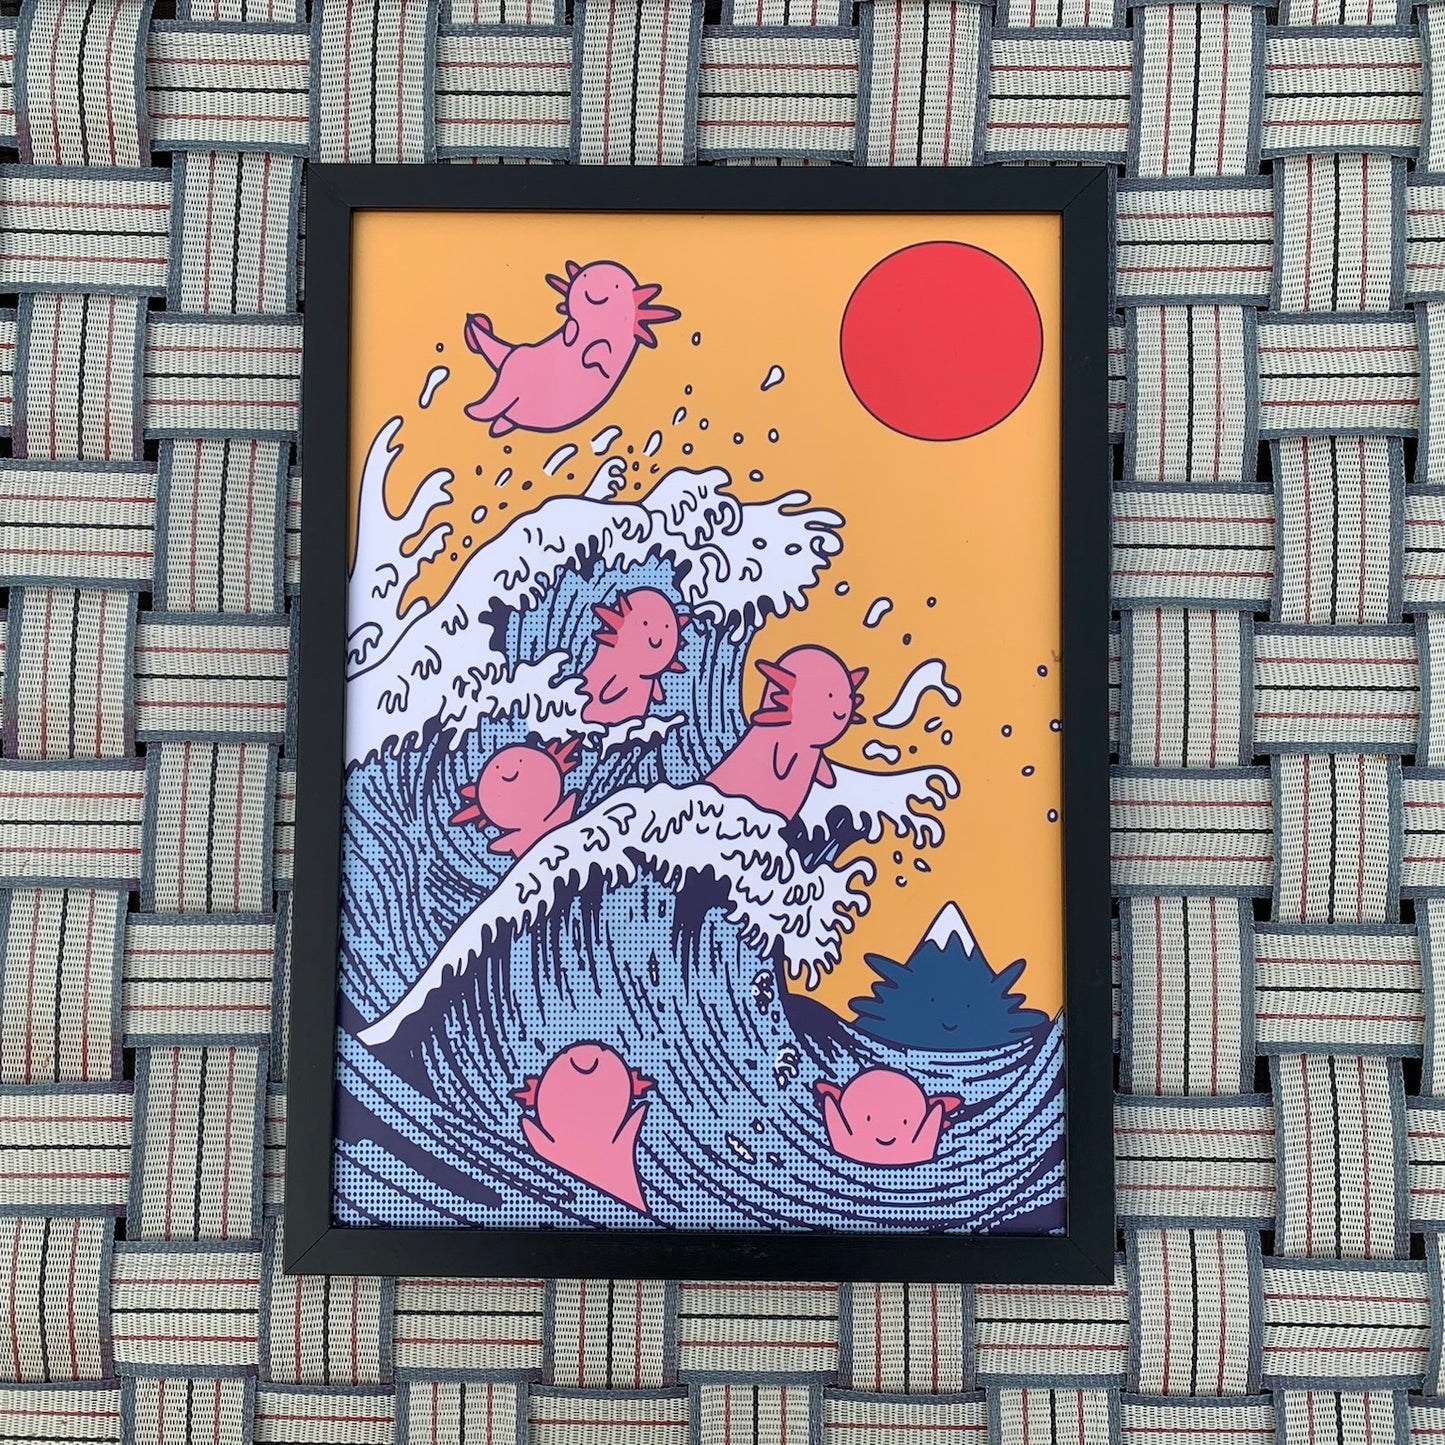 The Great Wave off Axolotls